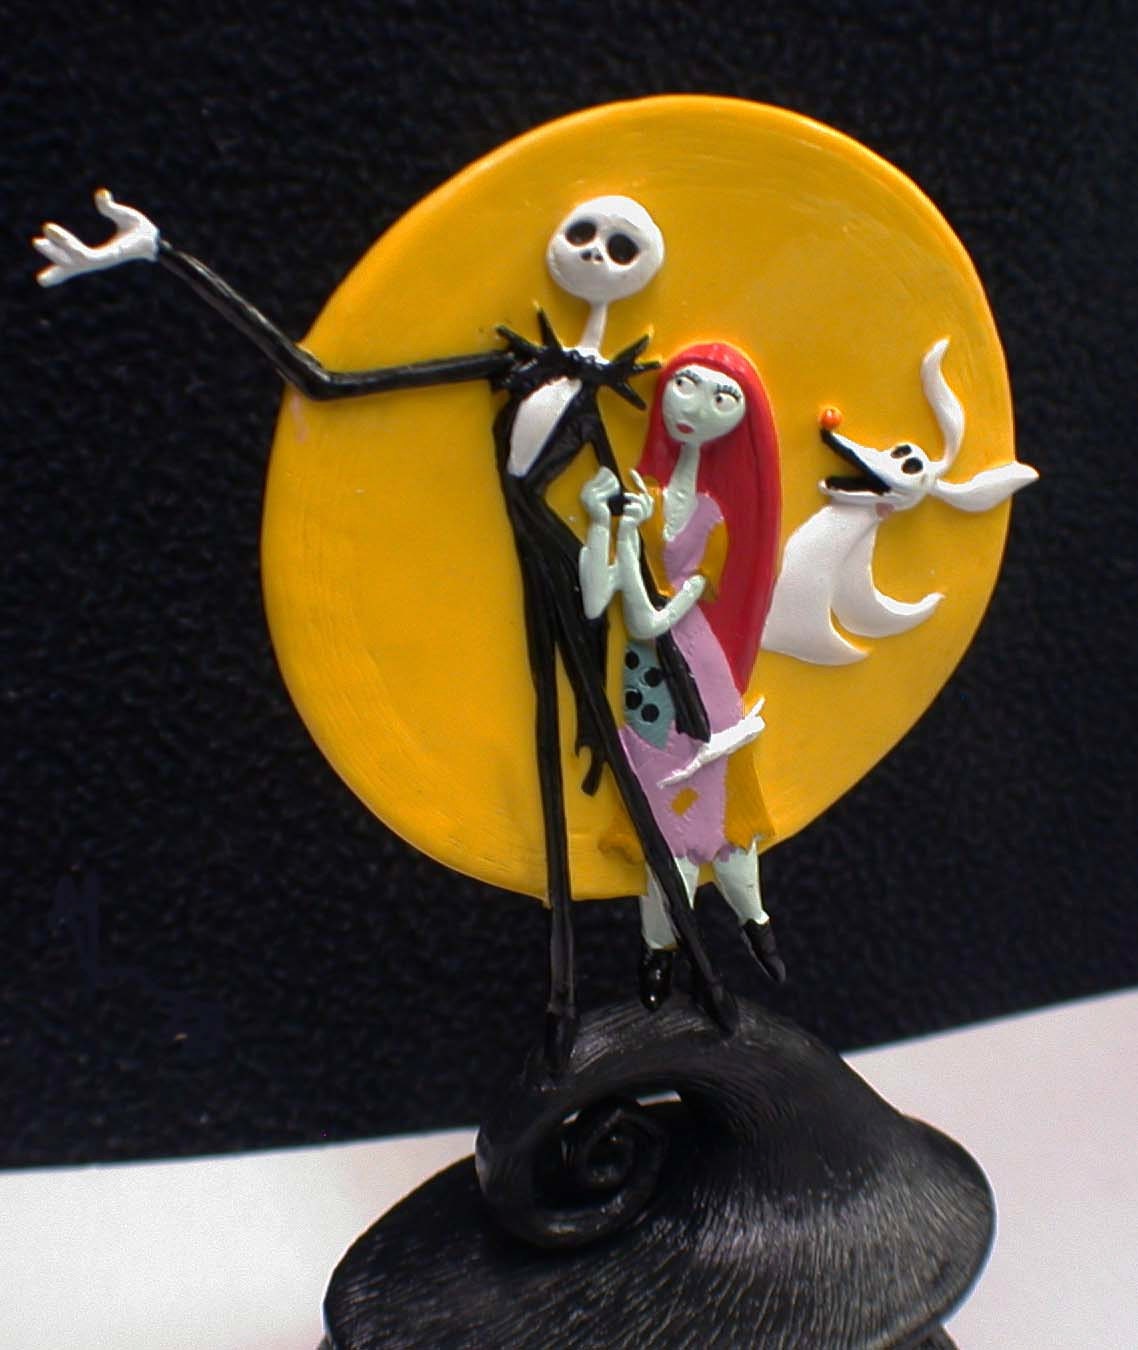 Nightmare before Christmas Wedding Cake topper by